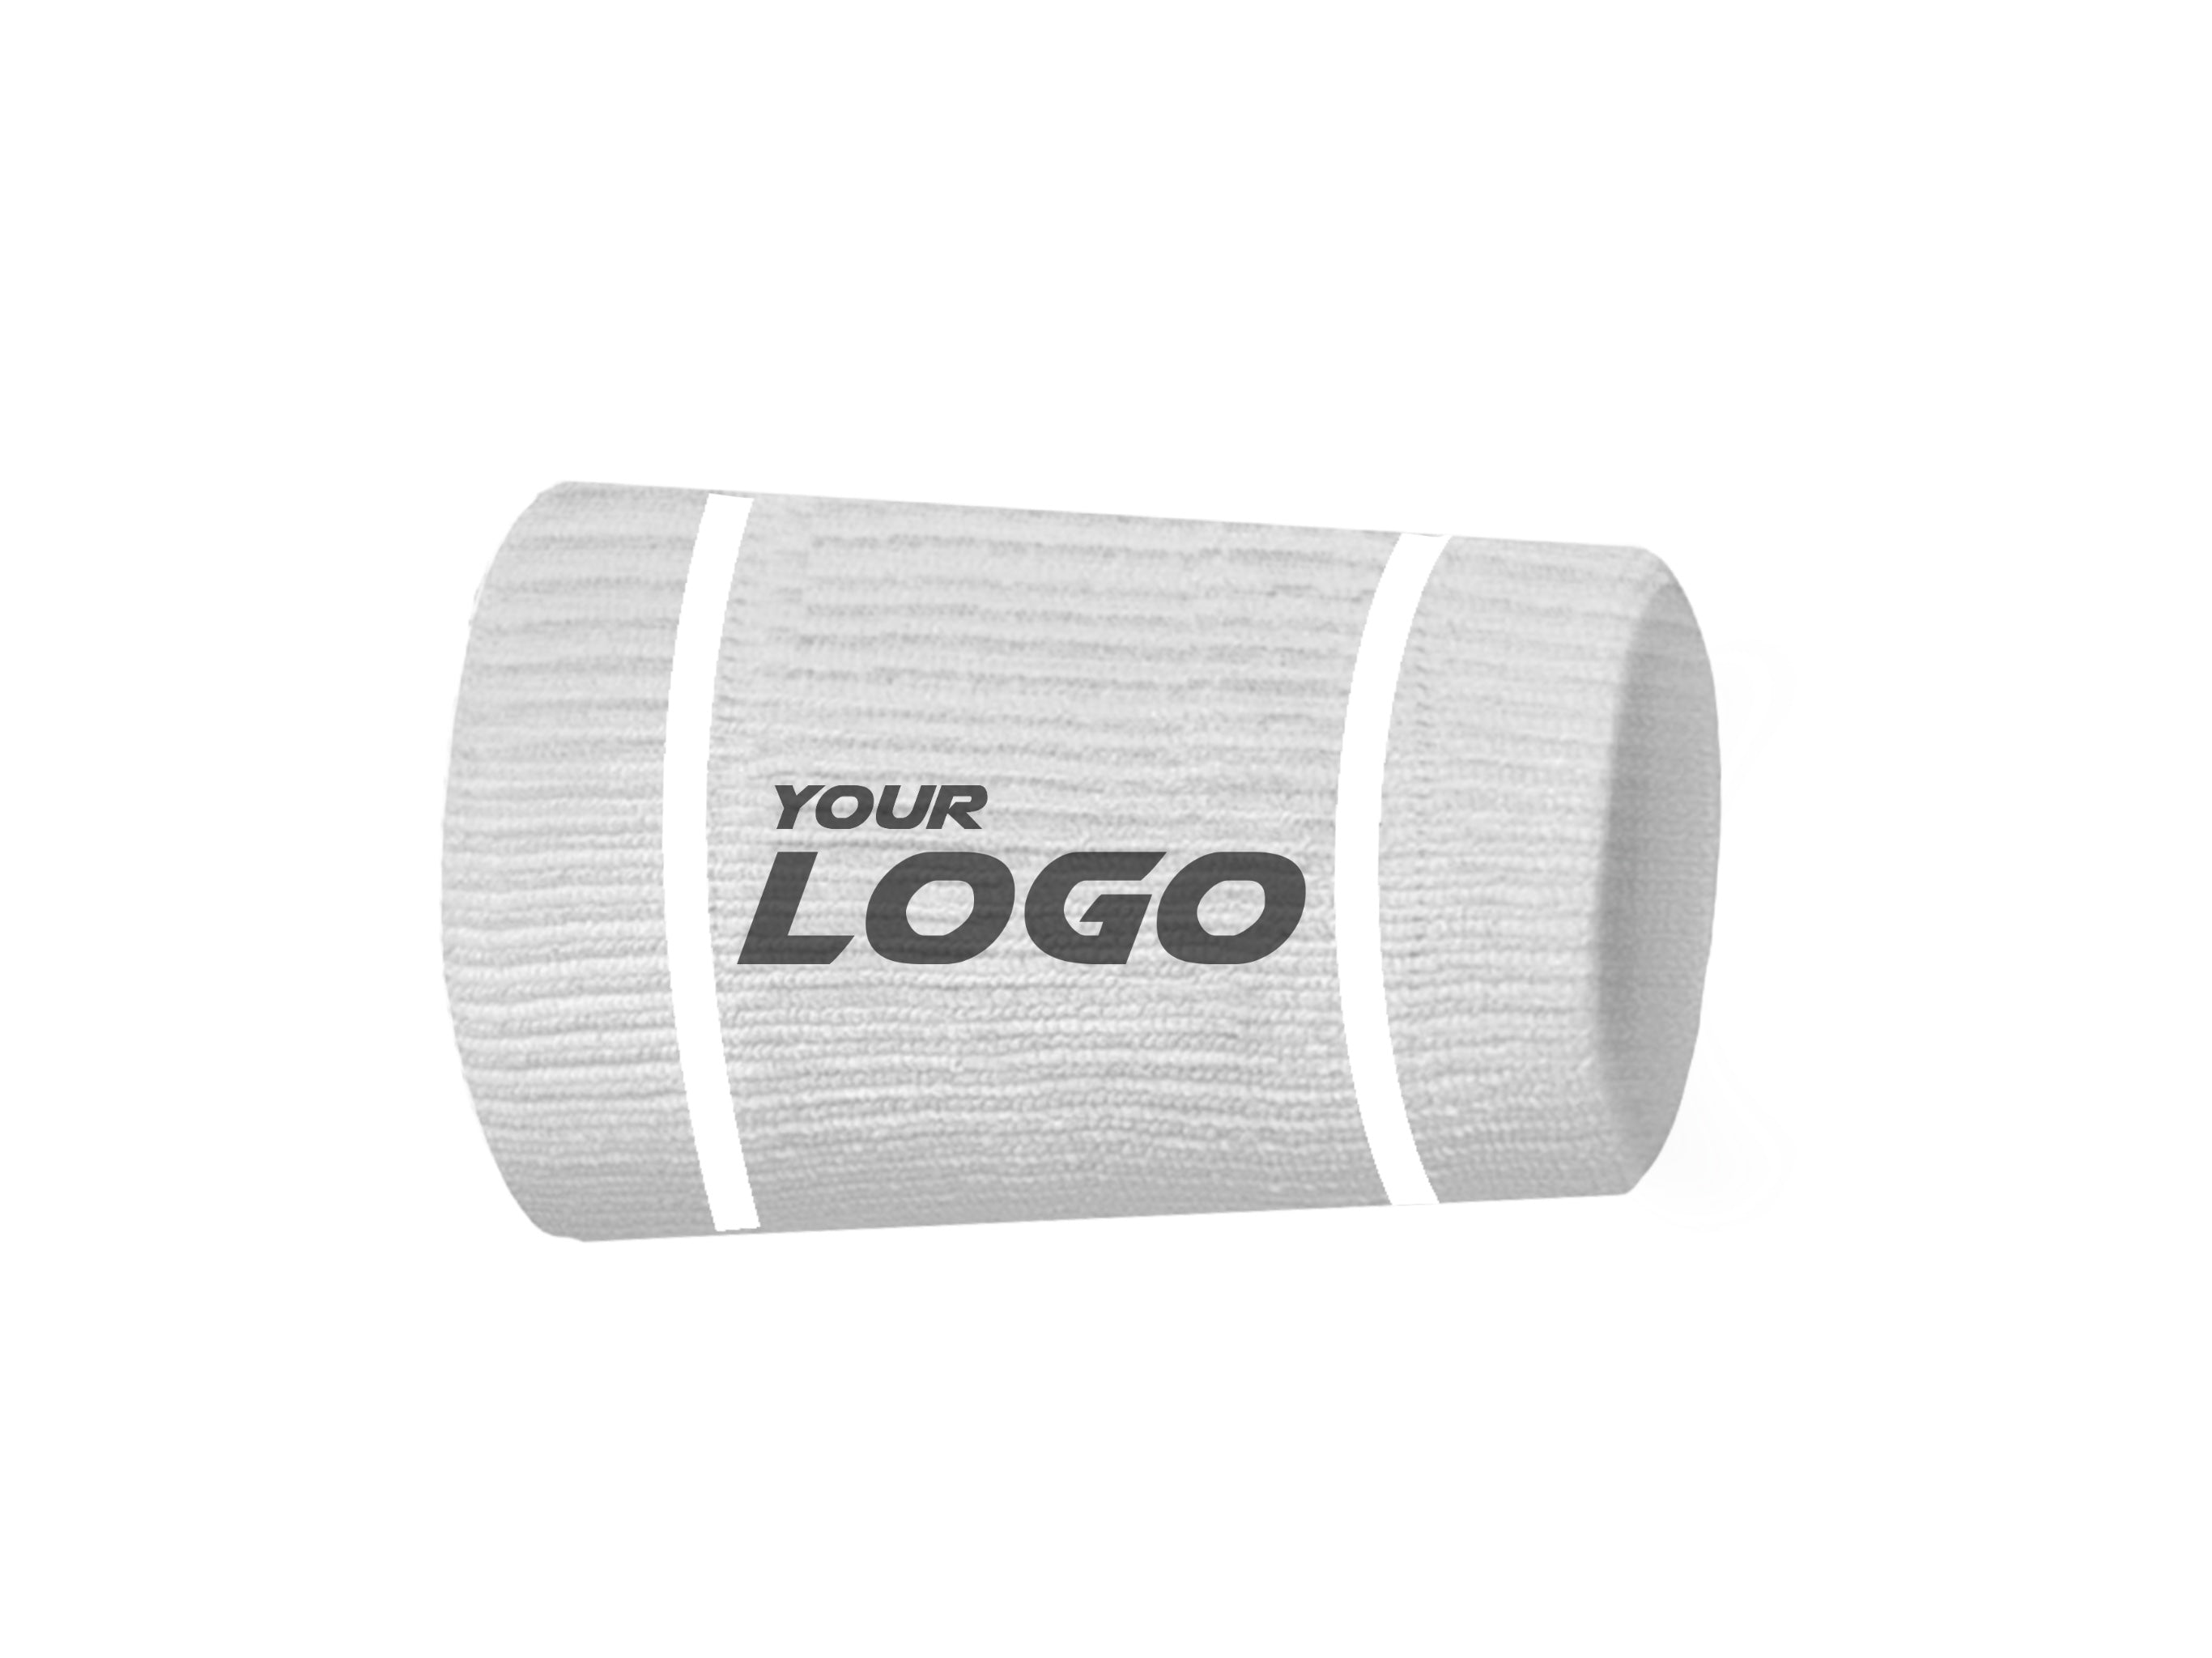 Customized Wrist Bands with lines (100 Pairs)